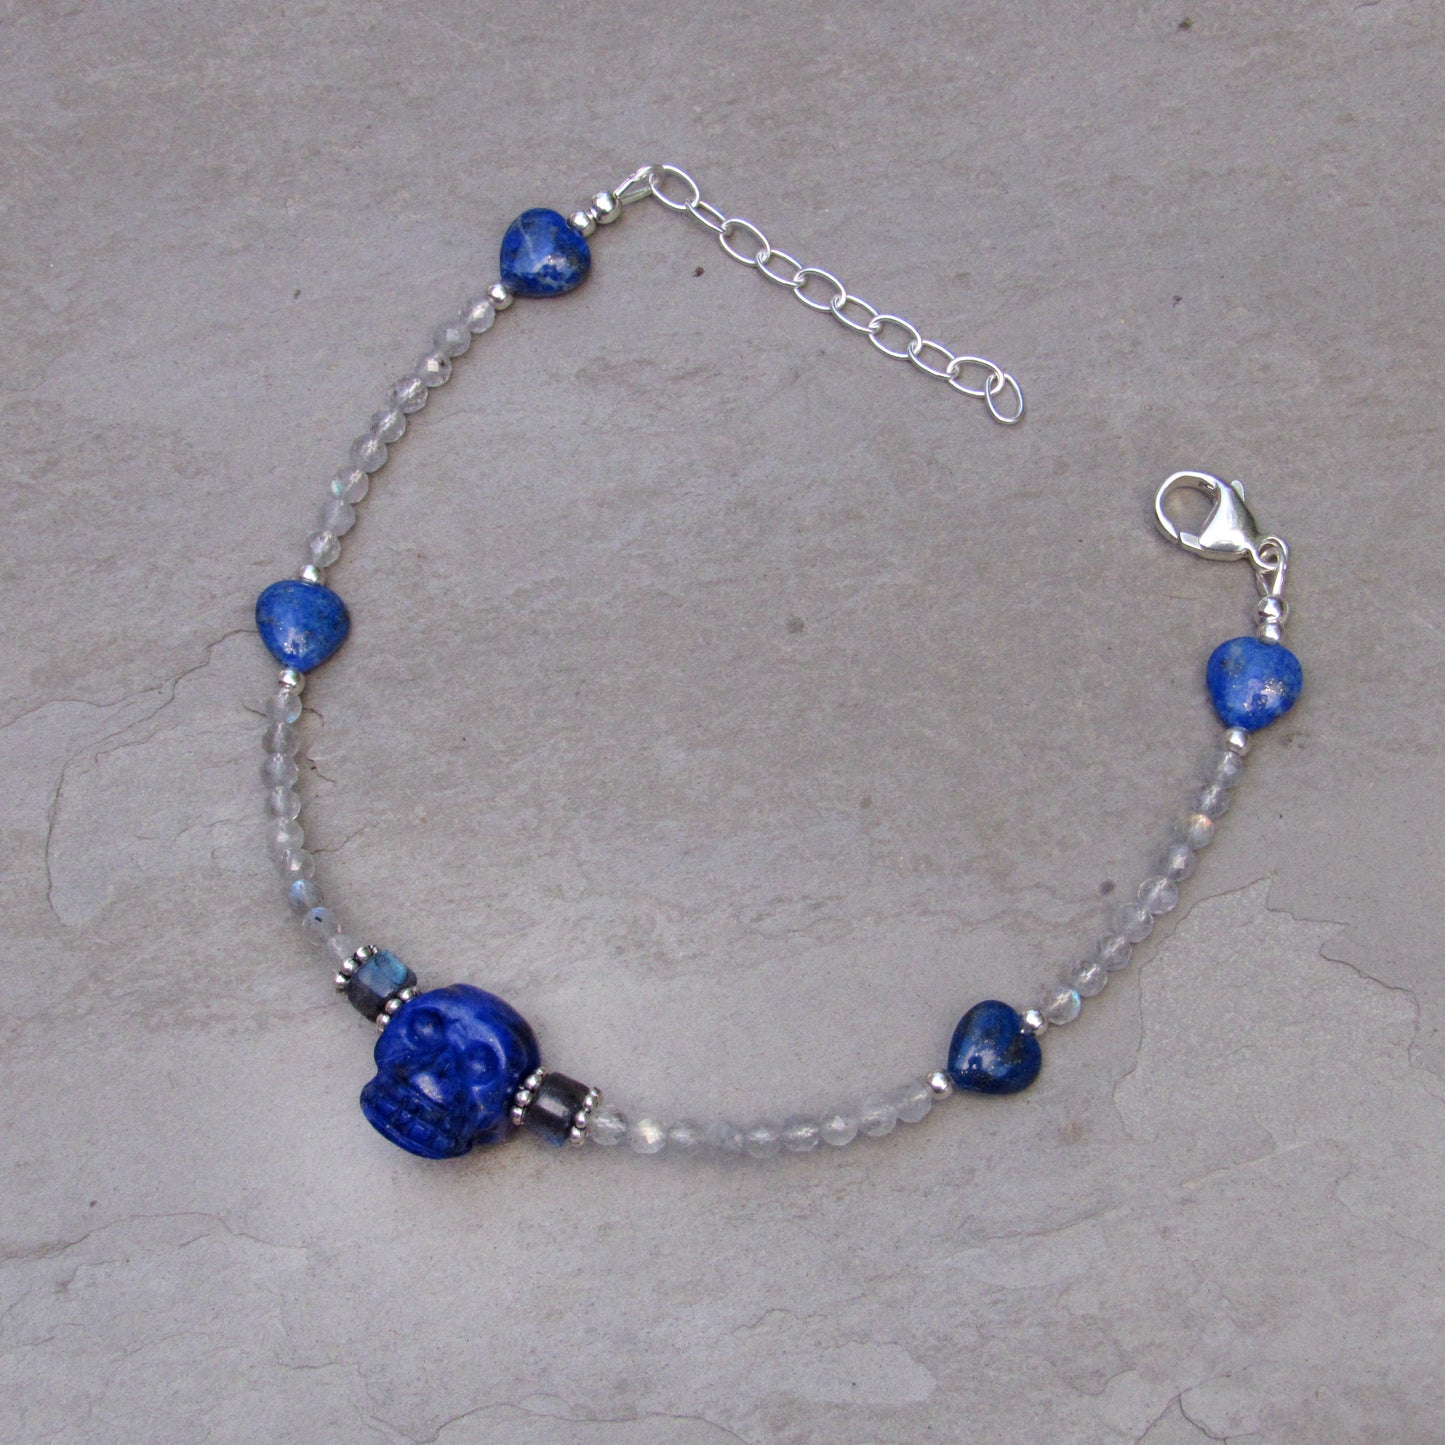 Lapis lazuli gemstone anklet with Labradorite, and Sterling Silver